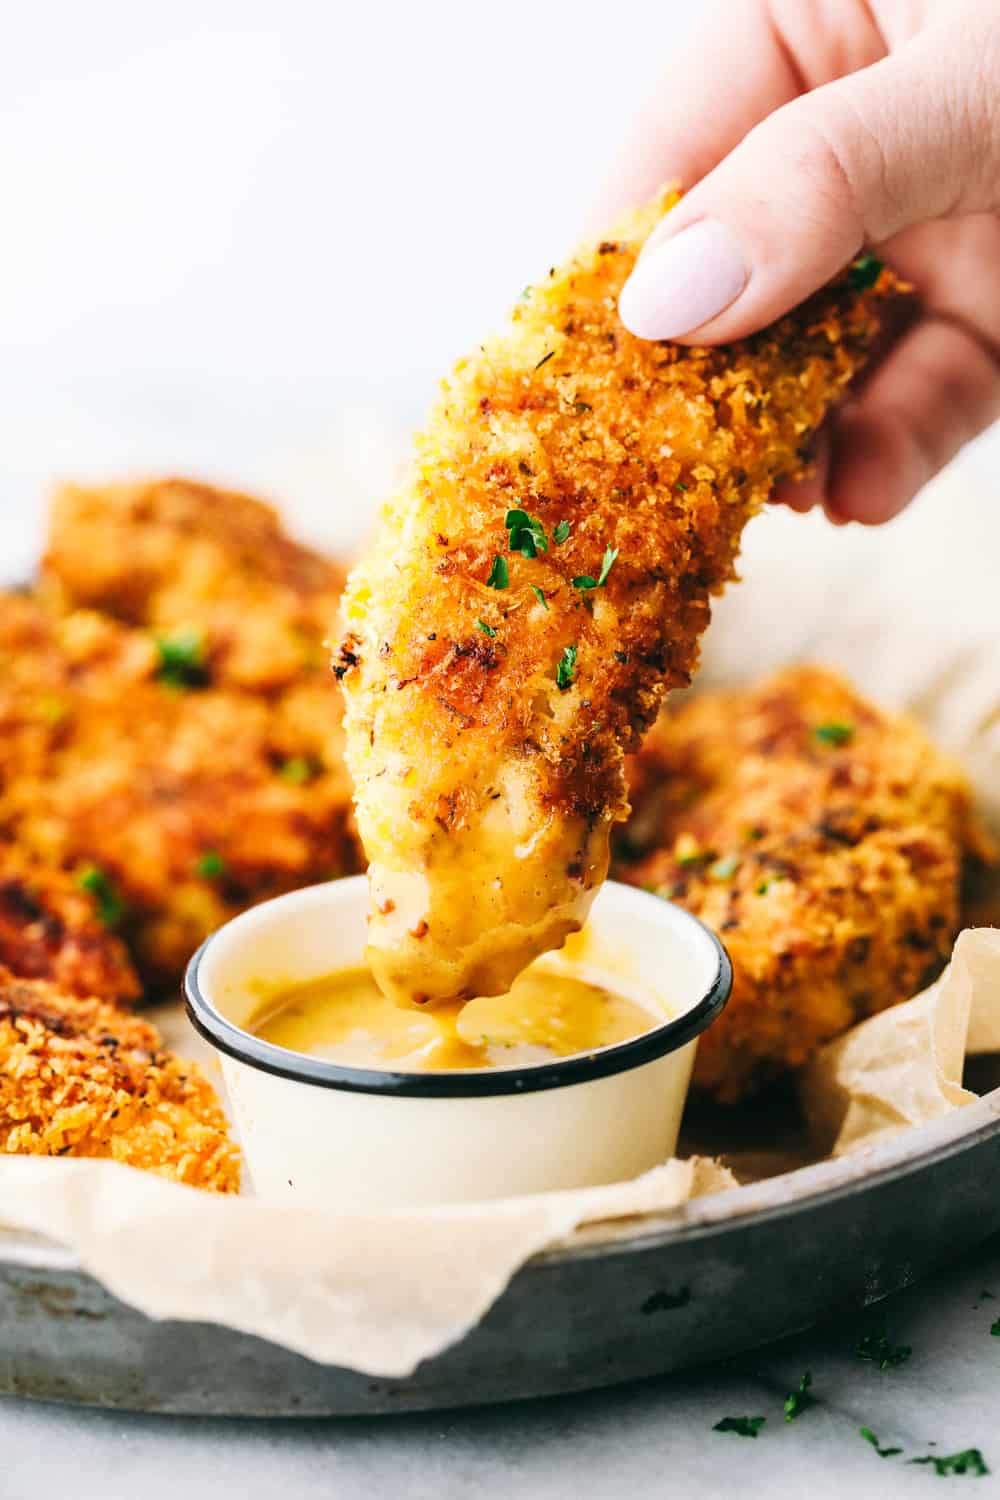 Easy Chicken Tender Recipes for Dinner With Few Ingredients  